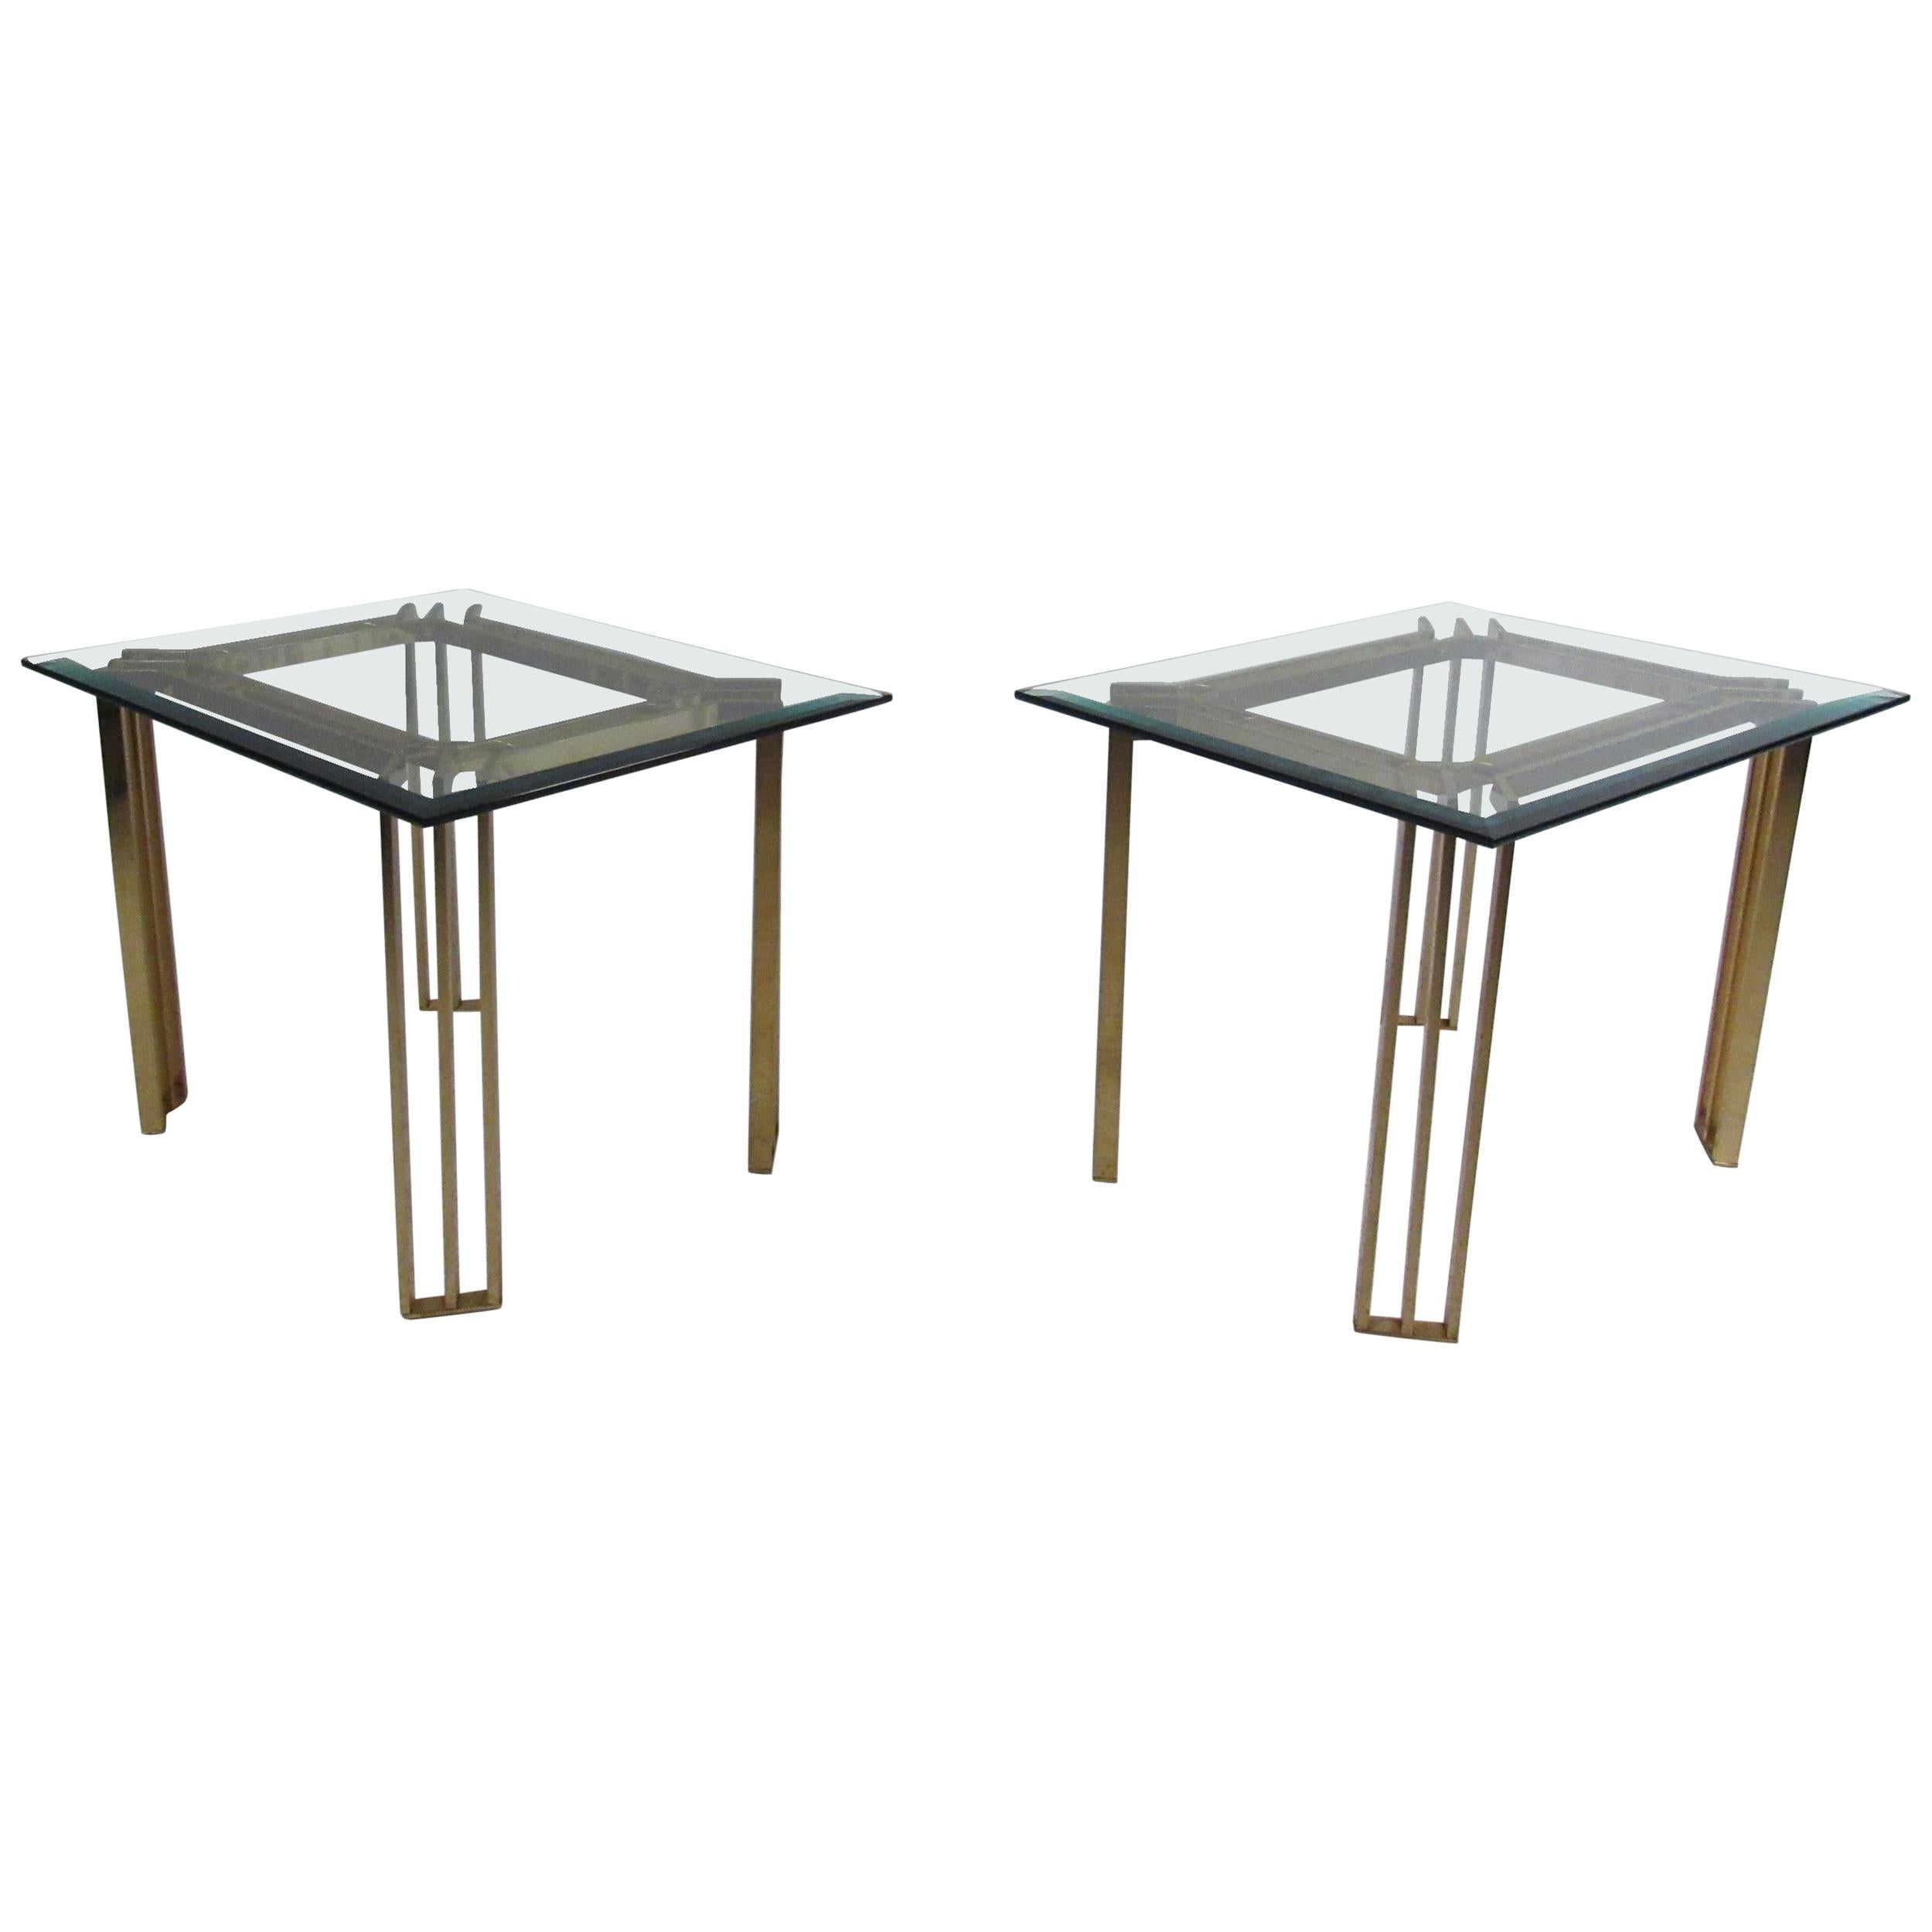 Pair of Italian Mid-Century Modern Glass Top End Tables